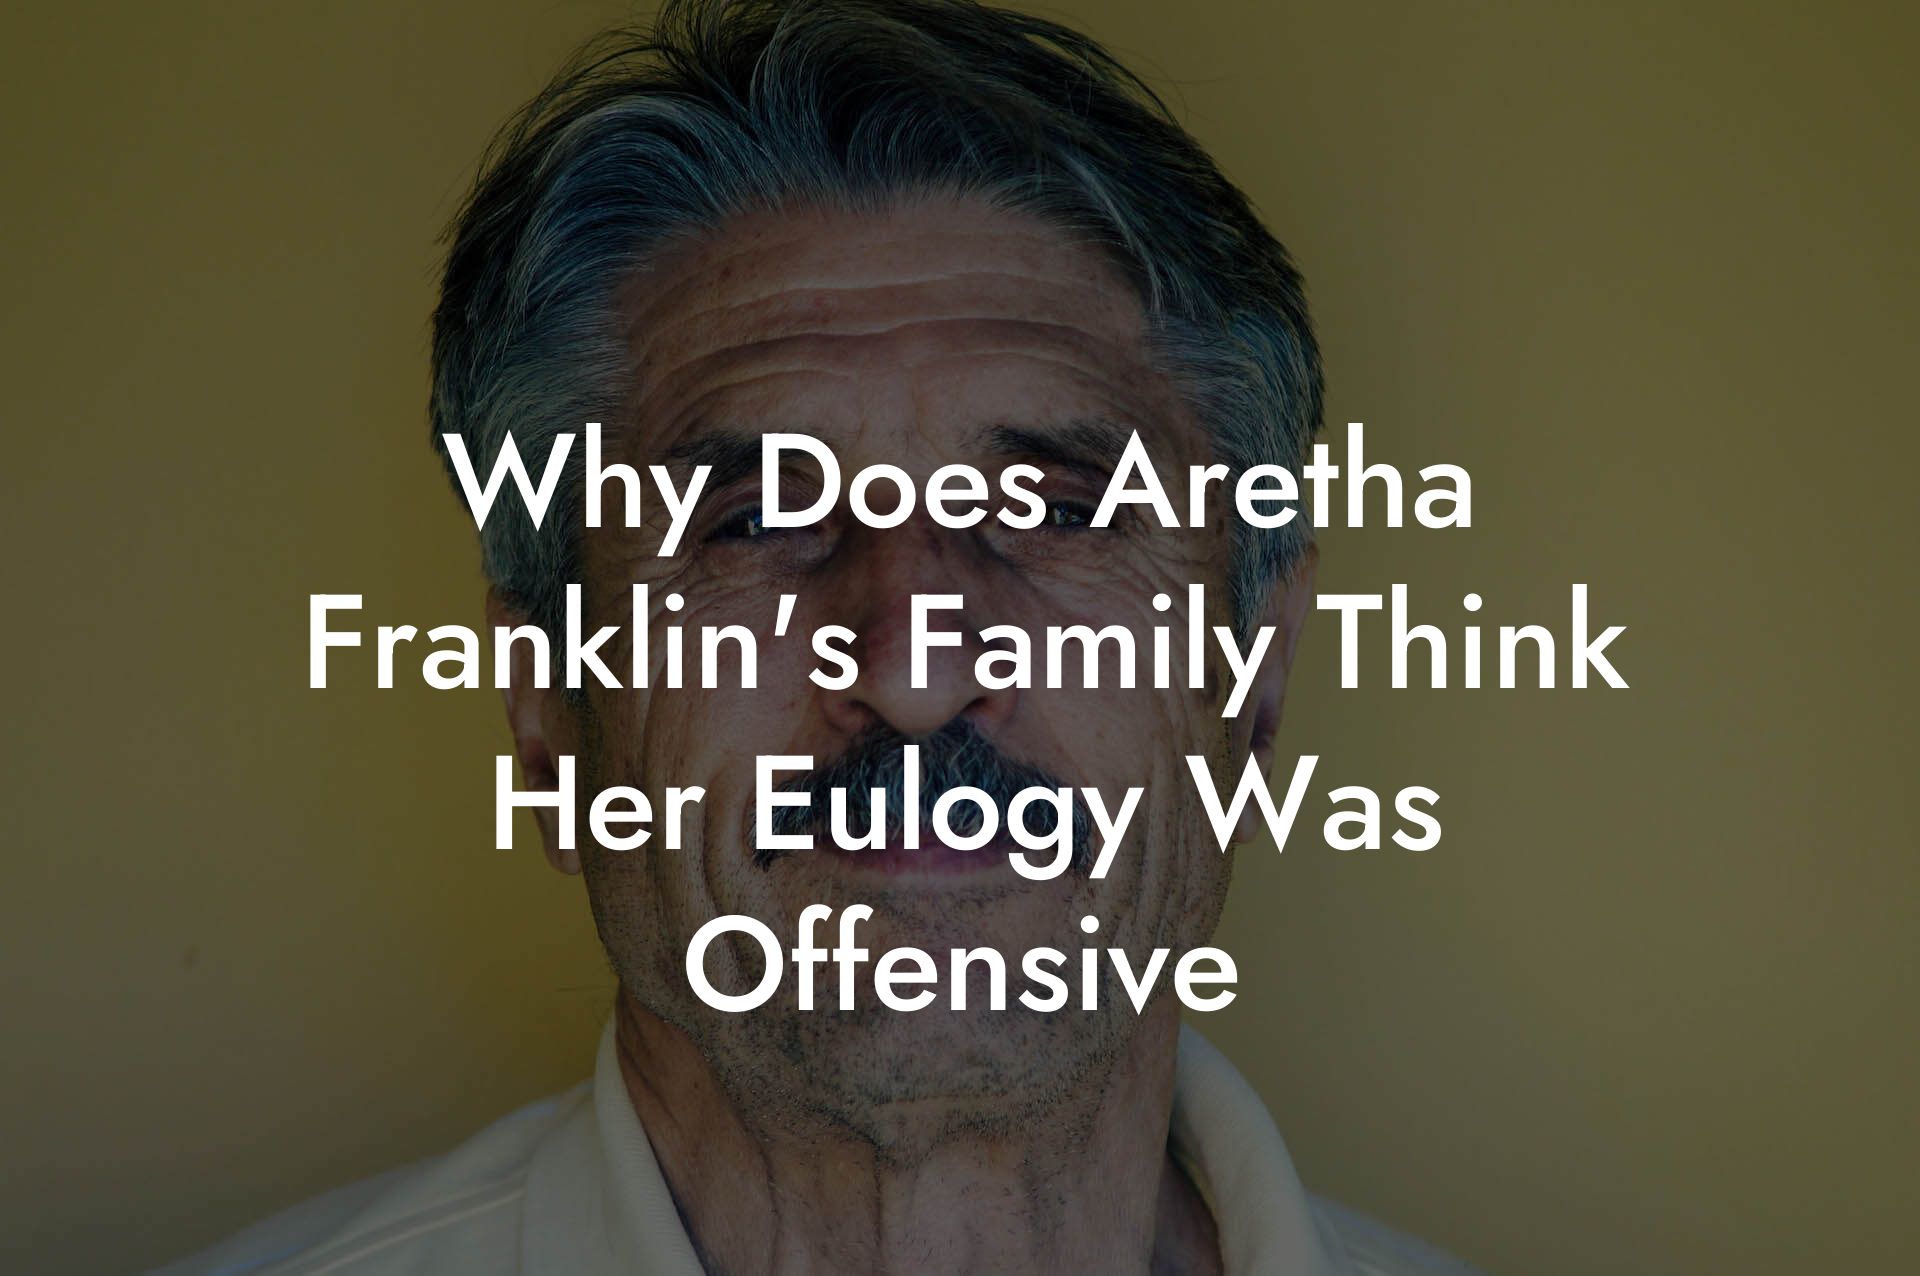 Why Does Aretha Franklin's Family Think Her Eulogy Was Offensive